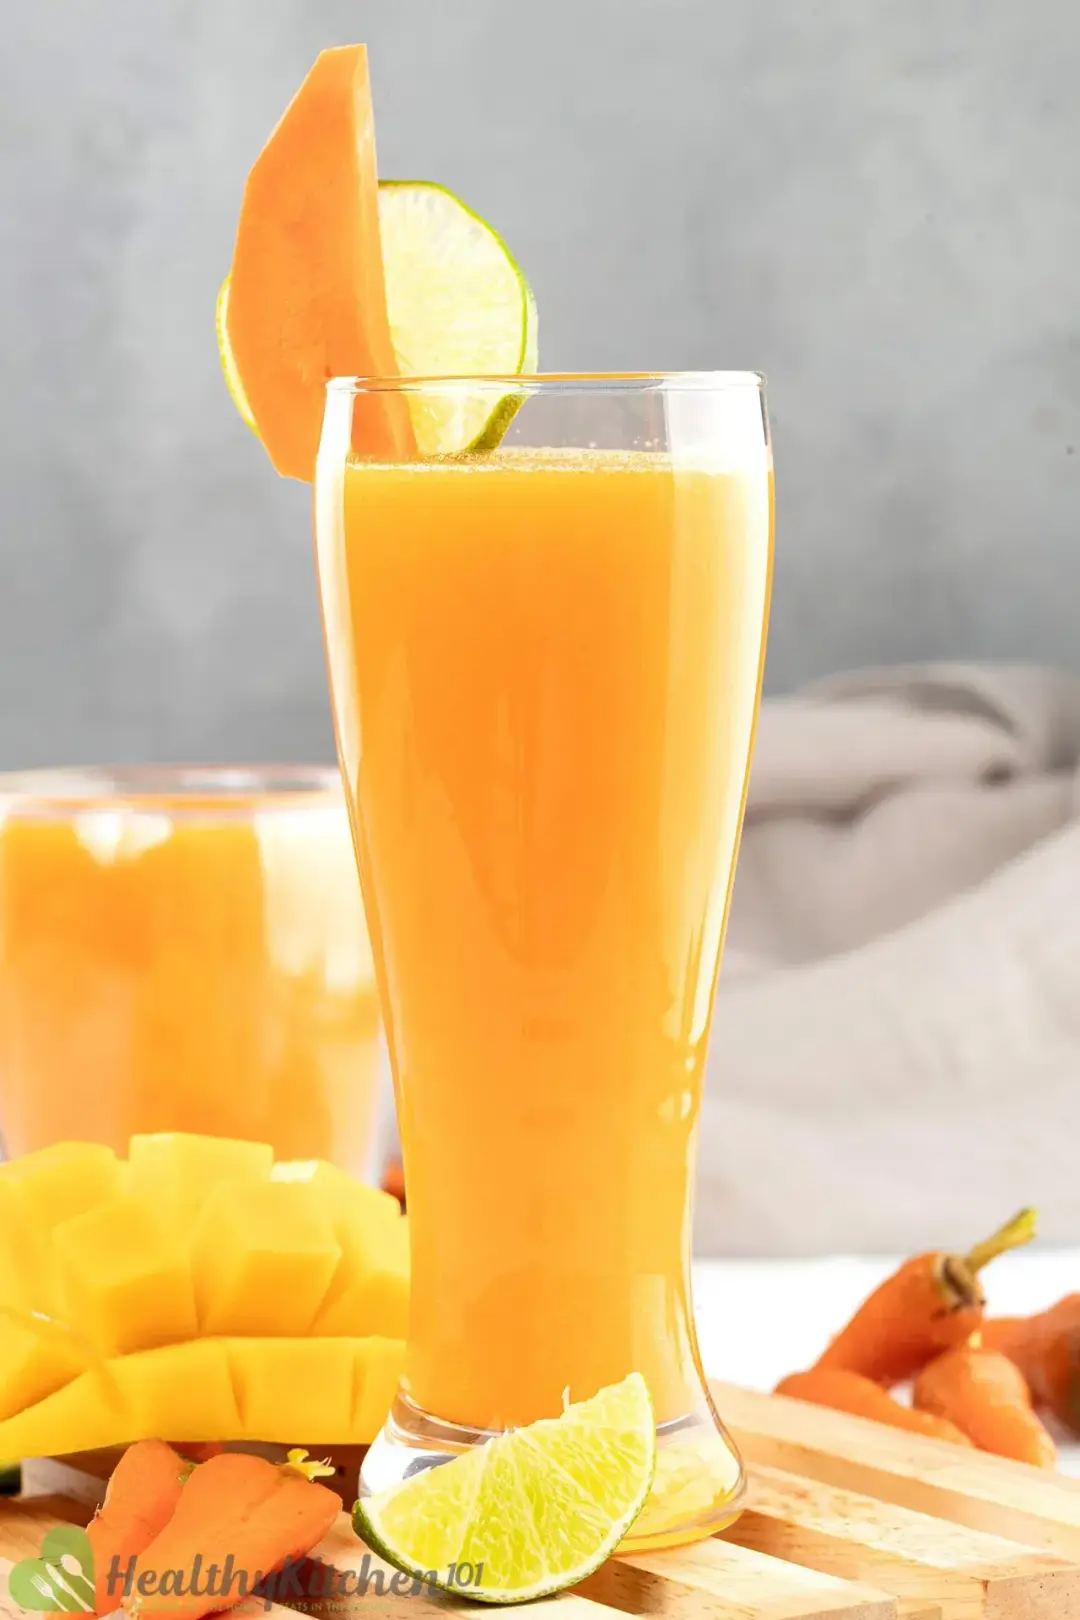 A tall glass of a mango smoothie garnished with a mango wedge, a lime wheel, and put next to lots of fruits